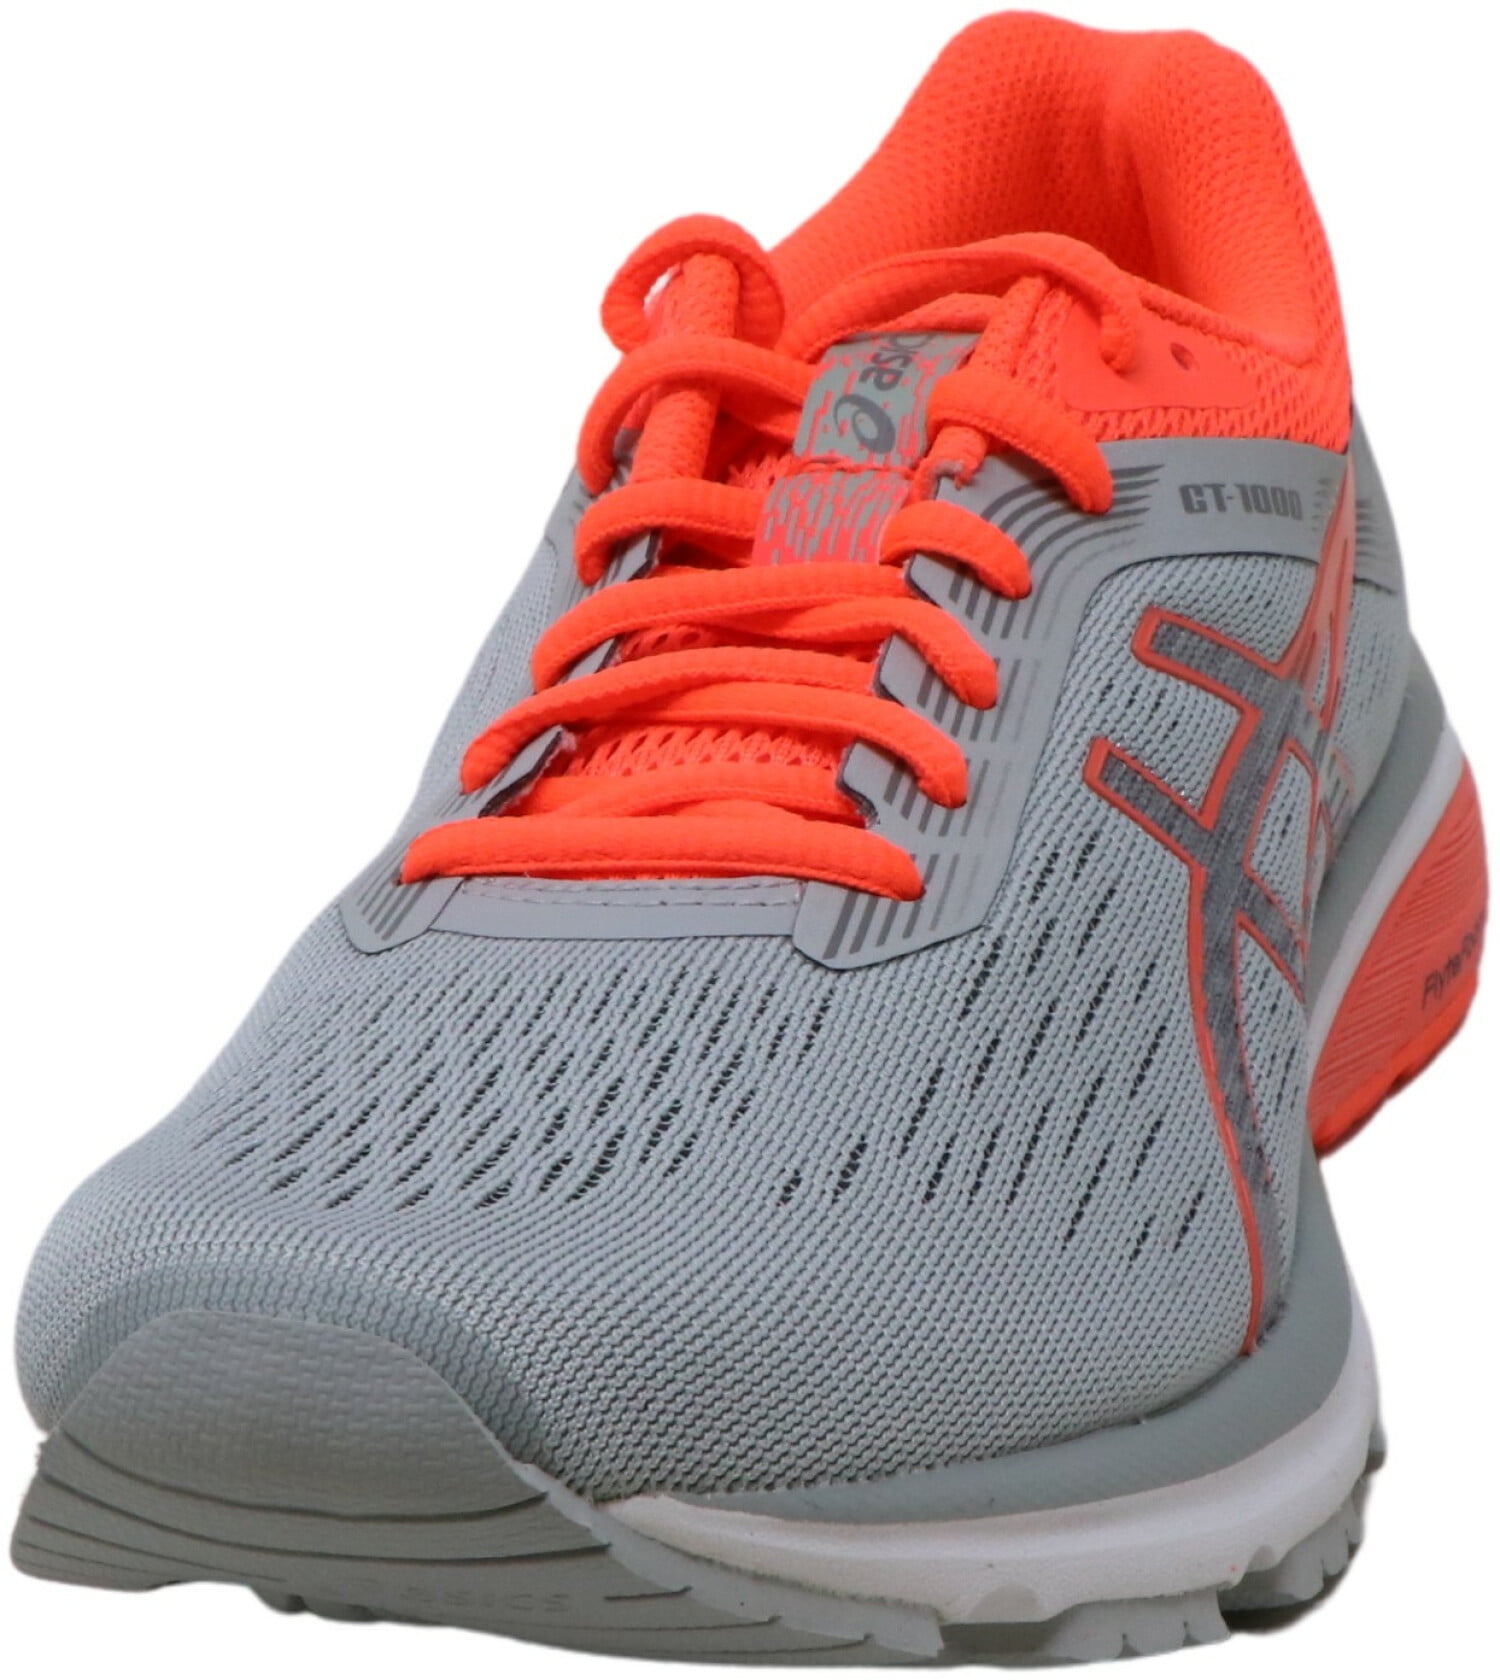 Gt-1000 7 Mid Grey / Flash Coral Ankle 